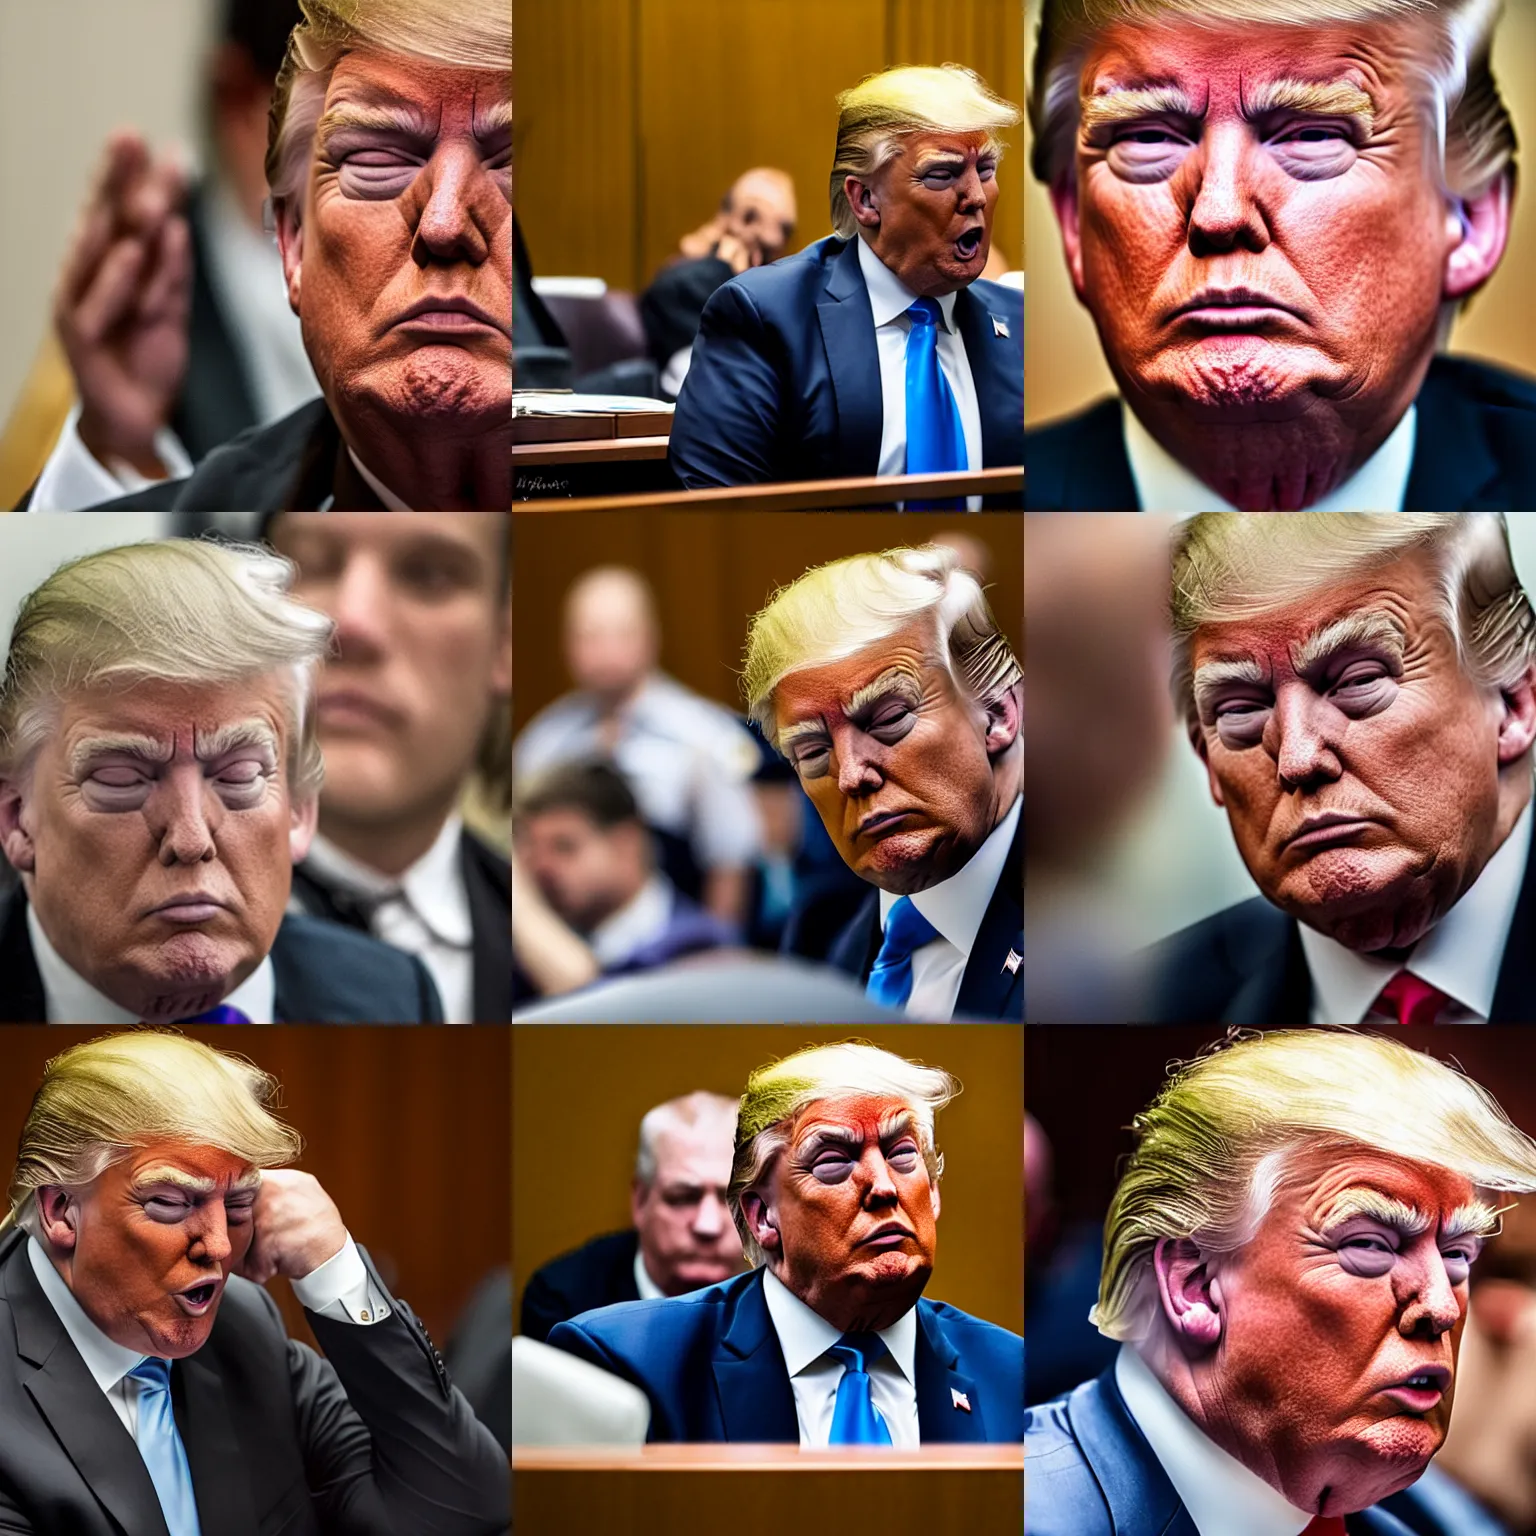 Image similar to Donald Trump crying in a courtroom, EOS-1D, f/1.4, ISO 200, 1/160s, 8K, RAW, unedited, symmetrical balance, in-frame